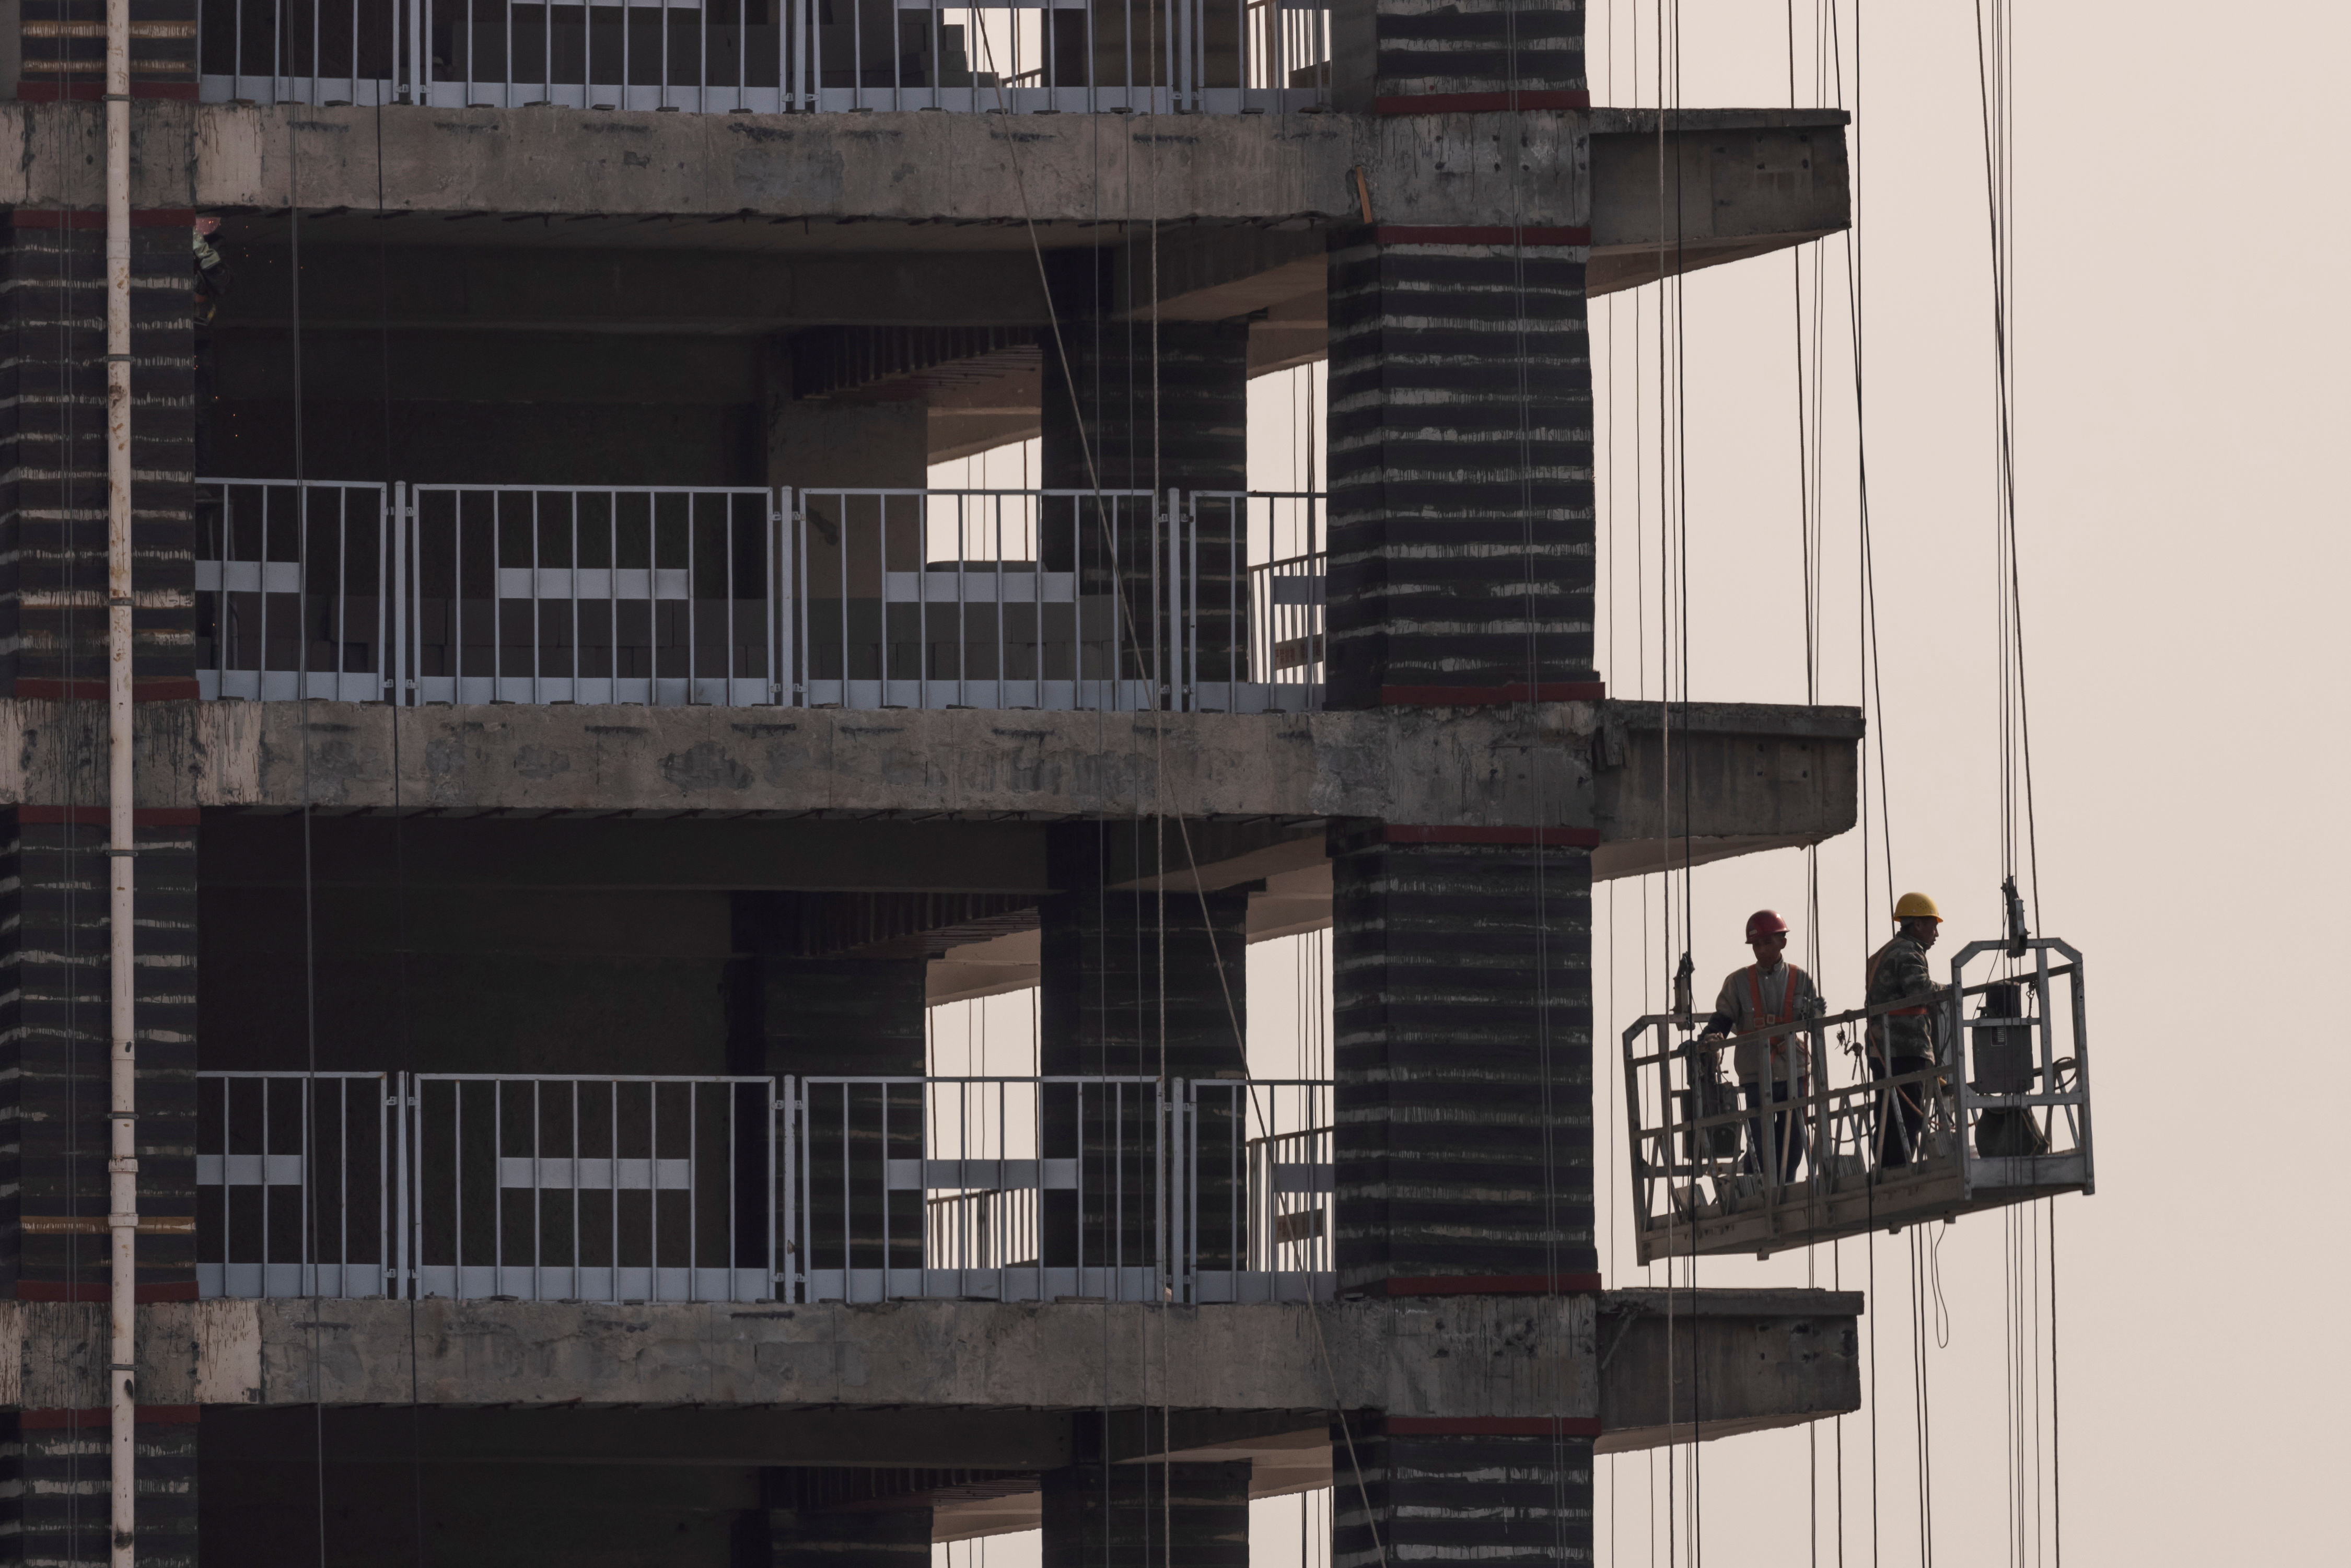 Men work at the construction site of a highrise building in Beijing